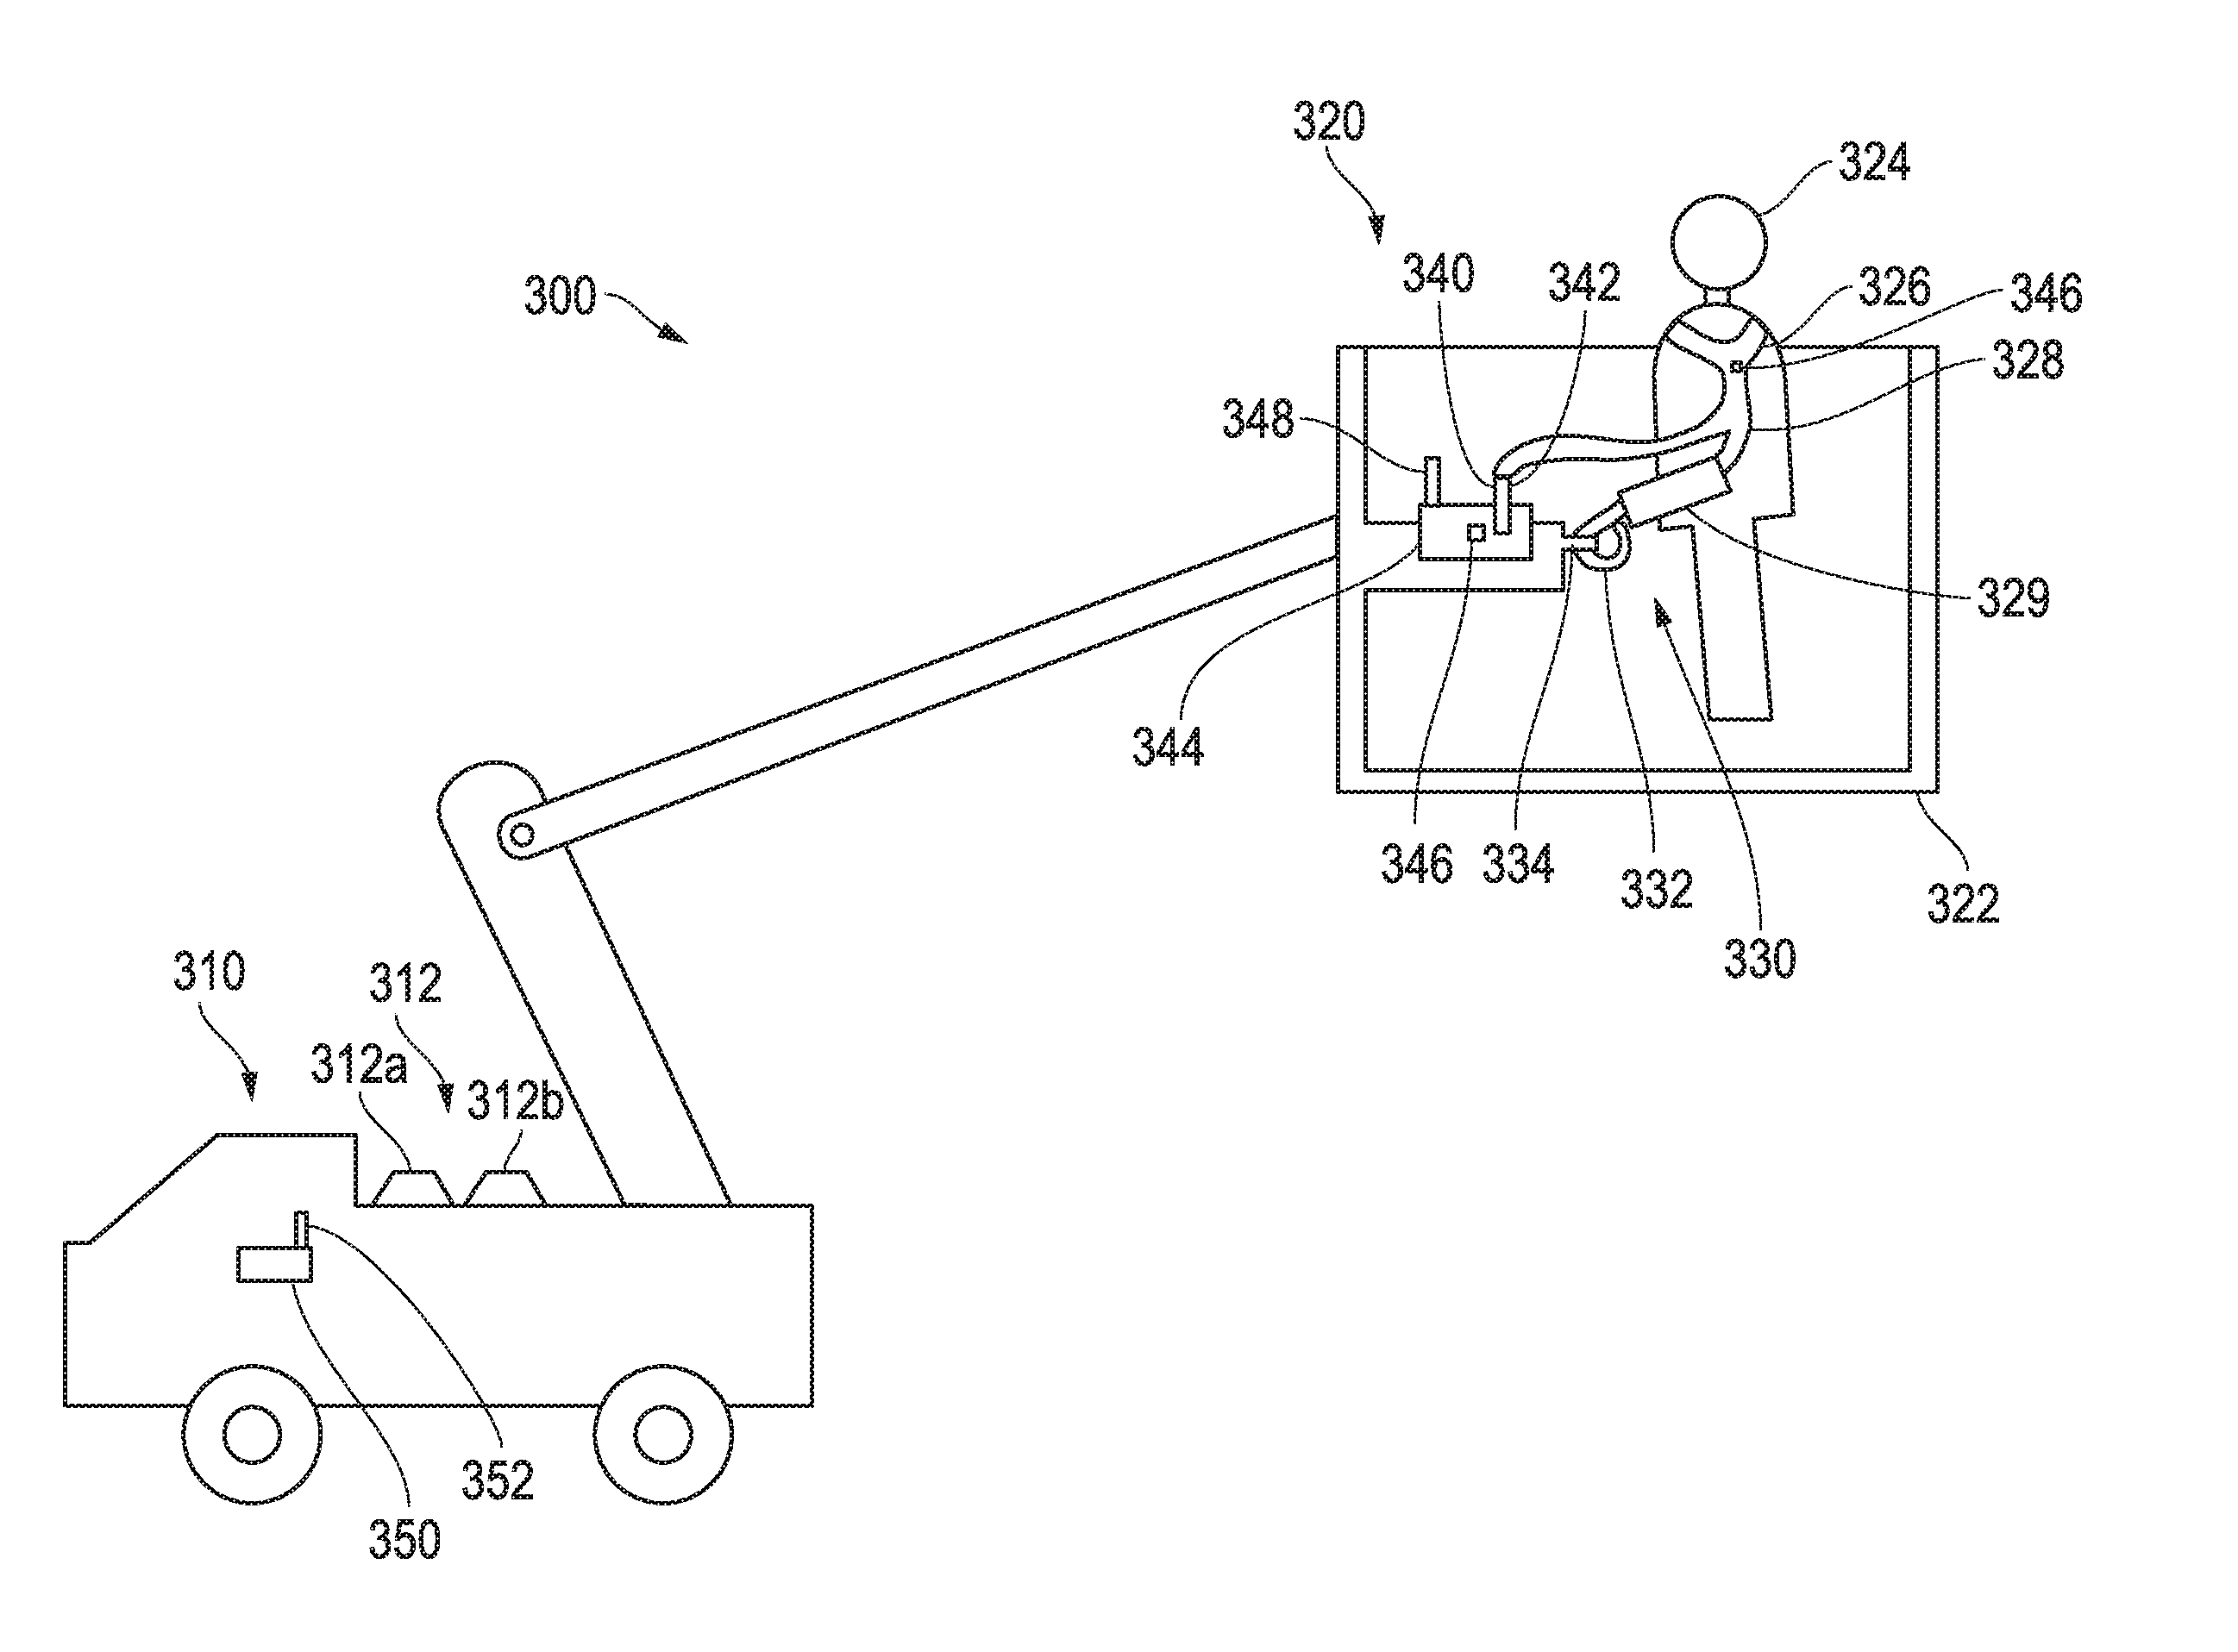 Aerialift Safety Device and Fall Restraint